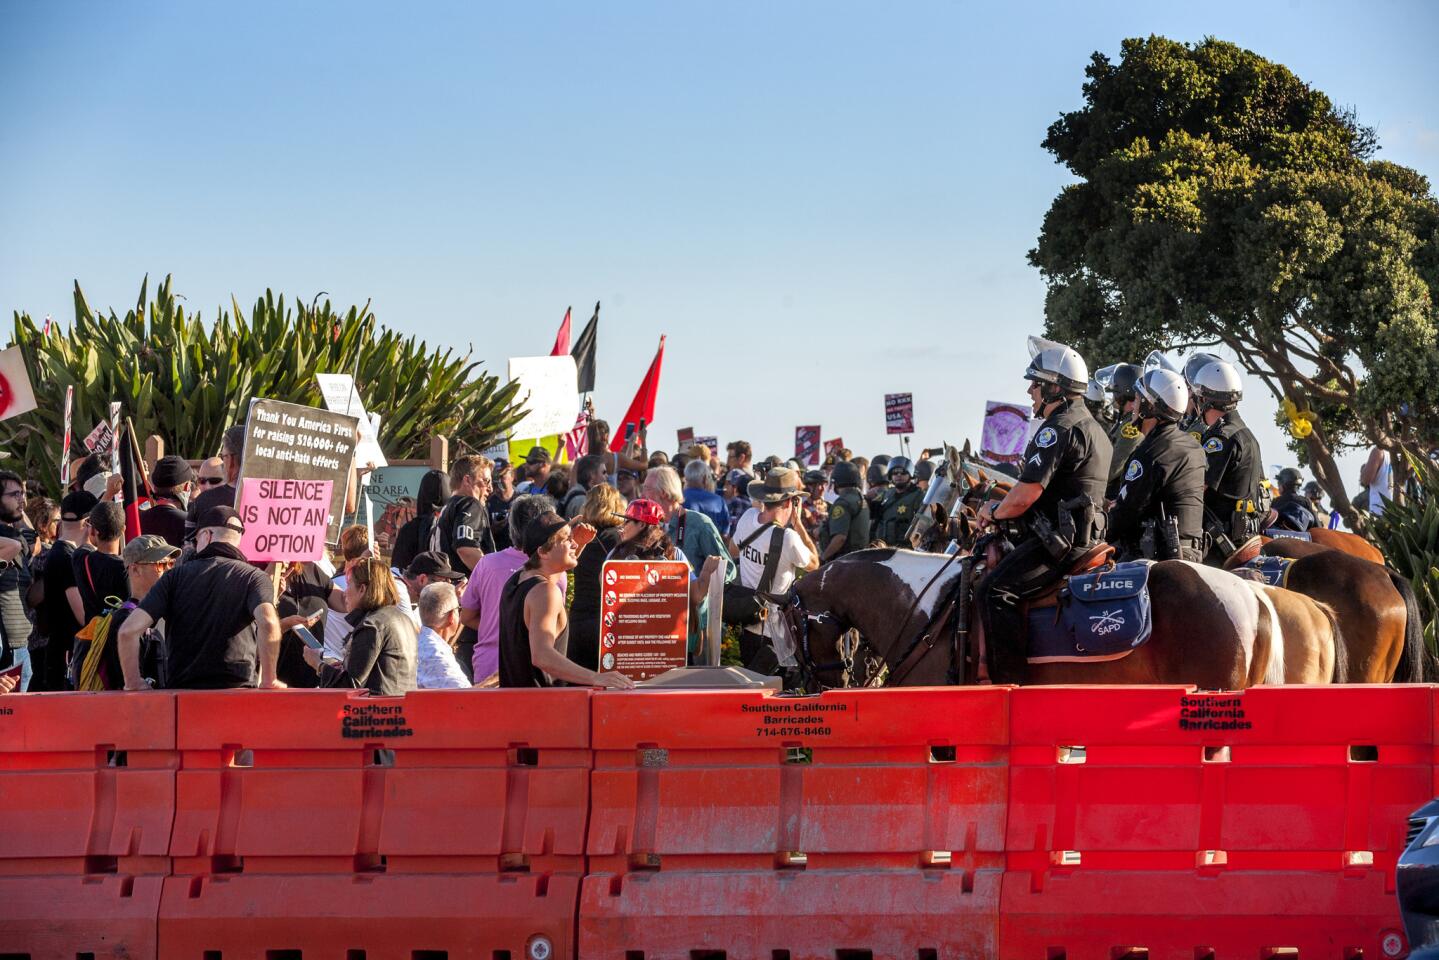 Mounted police keep anti-illegal immigration demonstrators and counter-protesters separated during Sunday's rally in Laguna Beach.